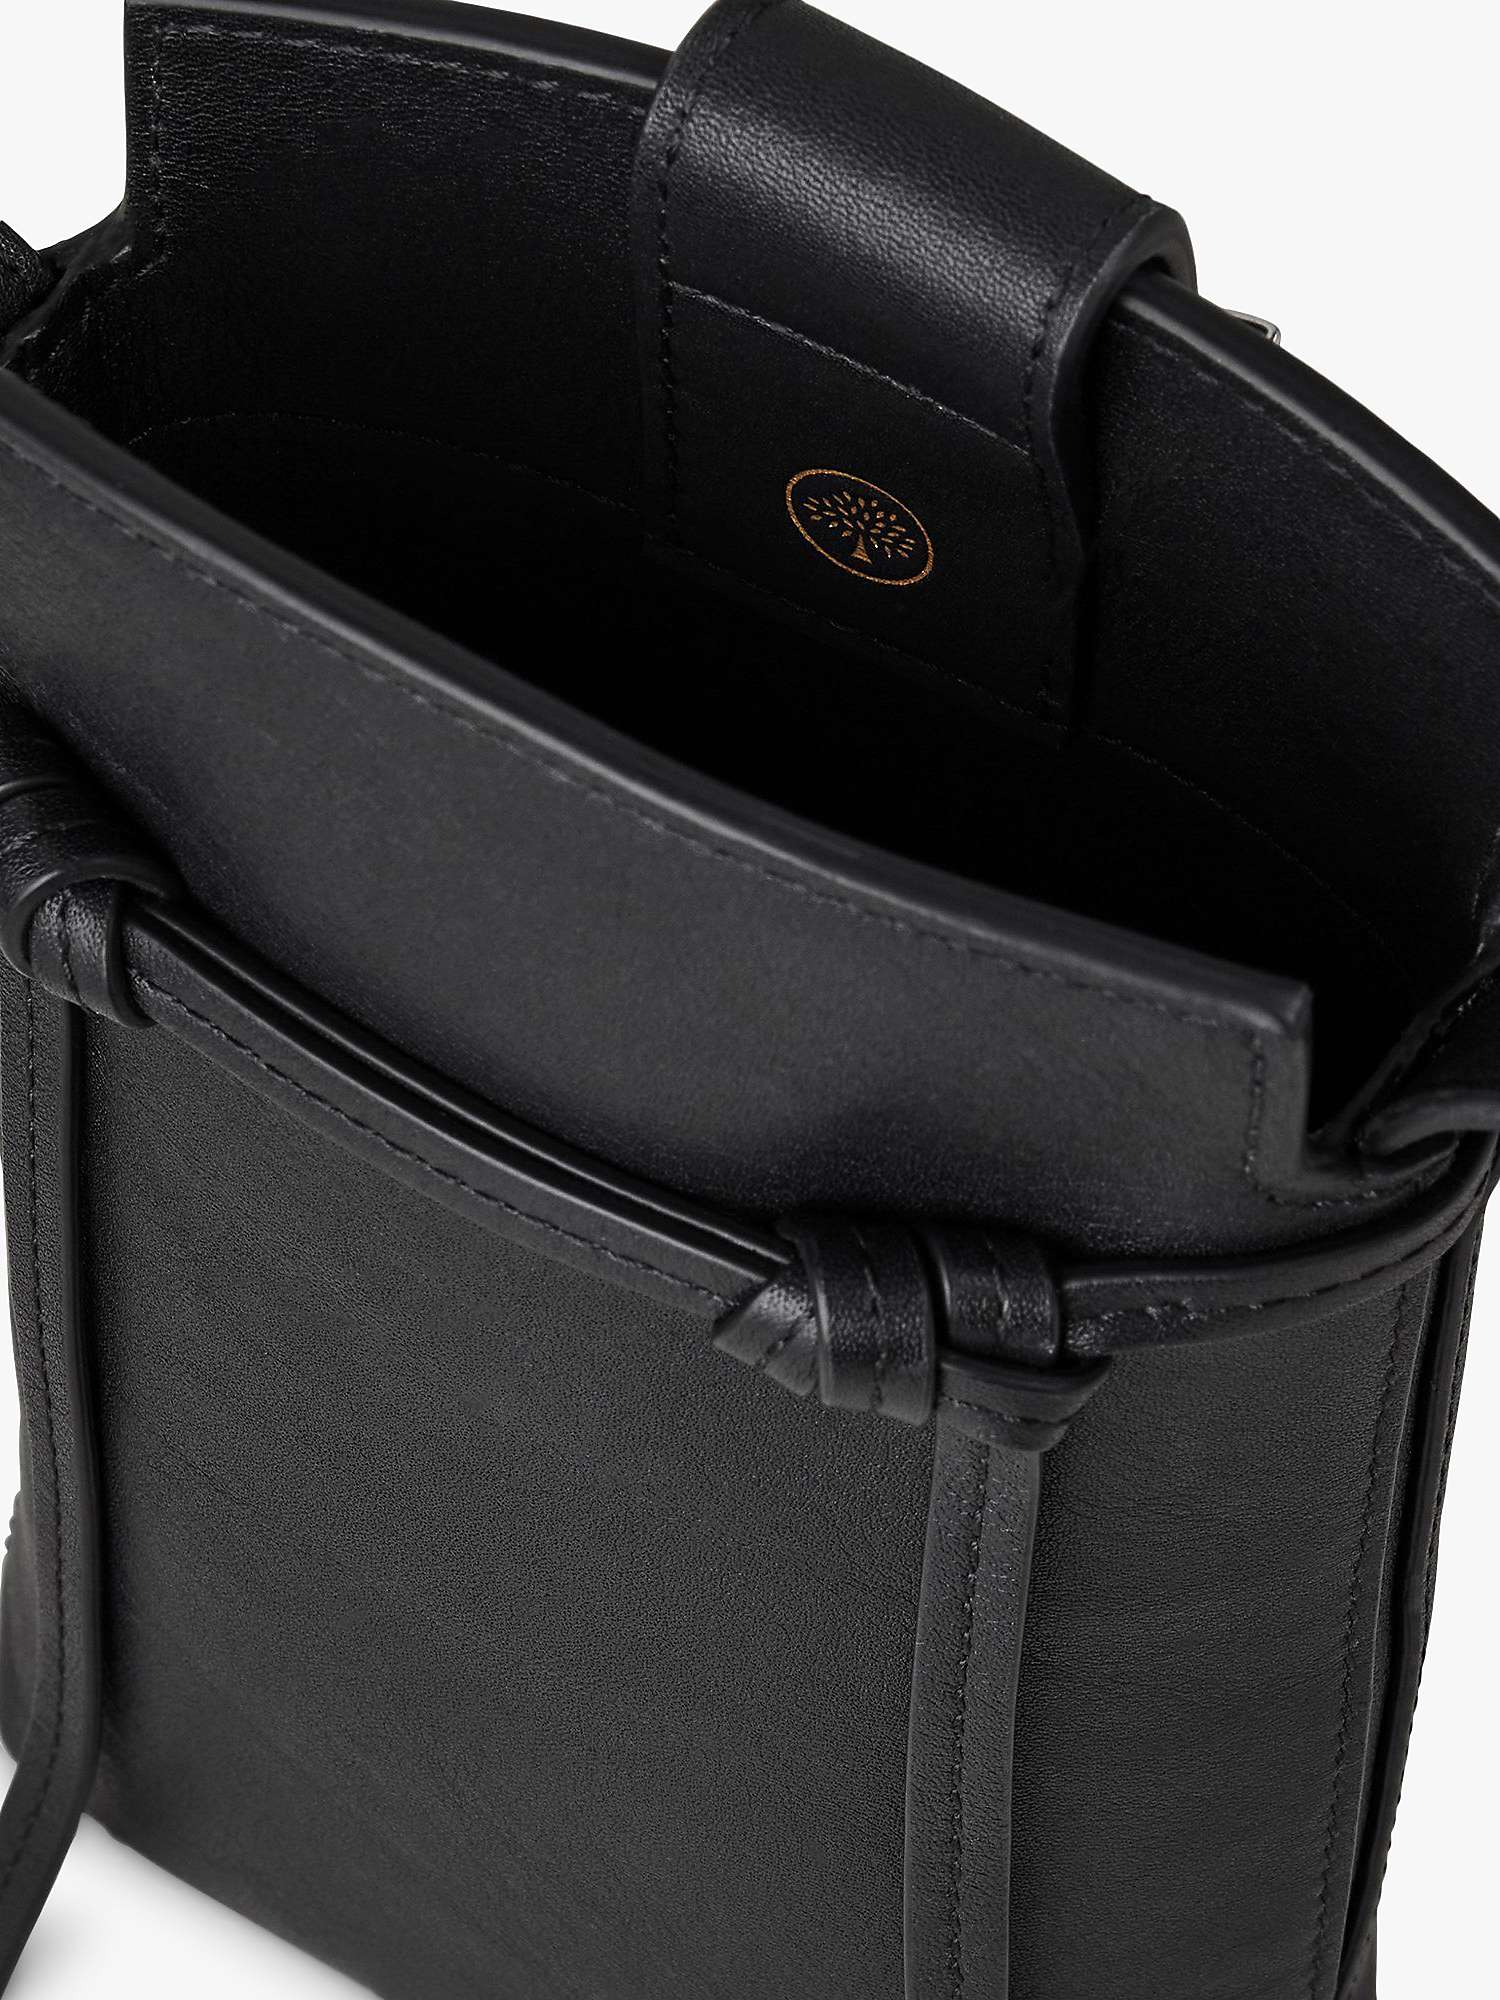 Buy Mulberry Clovelly Silky Calf Leather Phone Pouch, Black Online at johnlewis.com